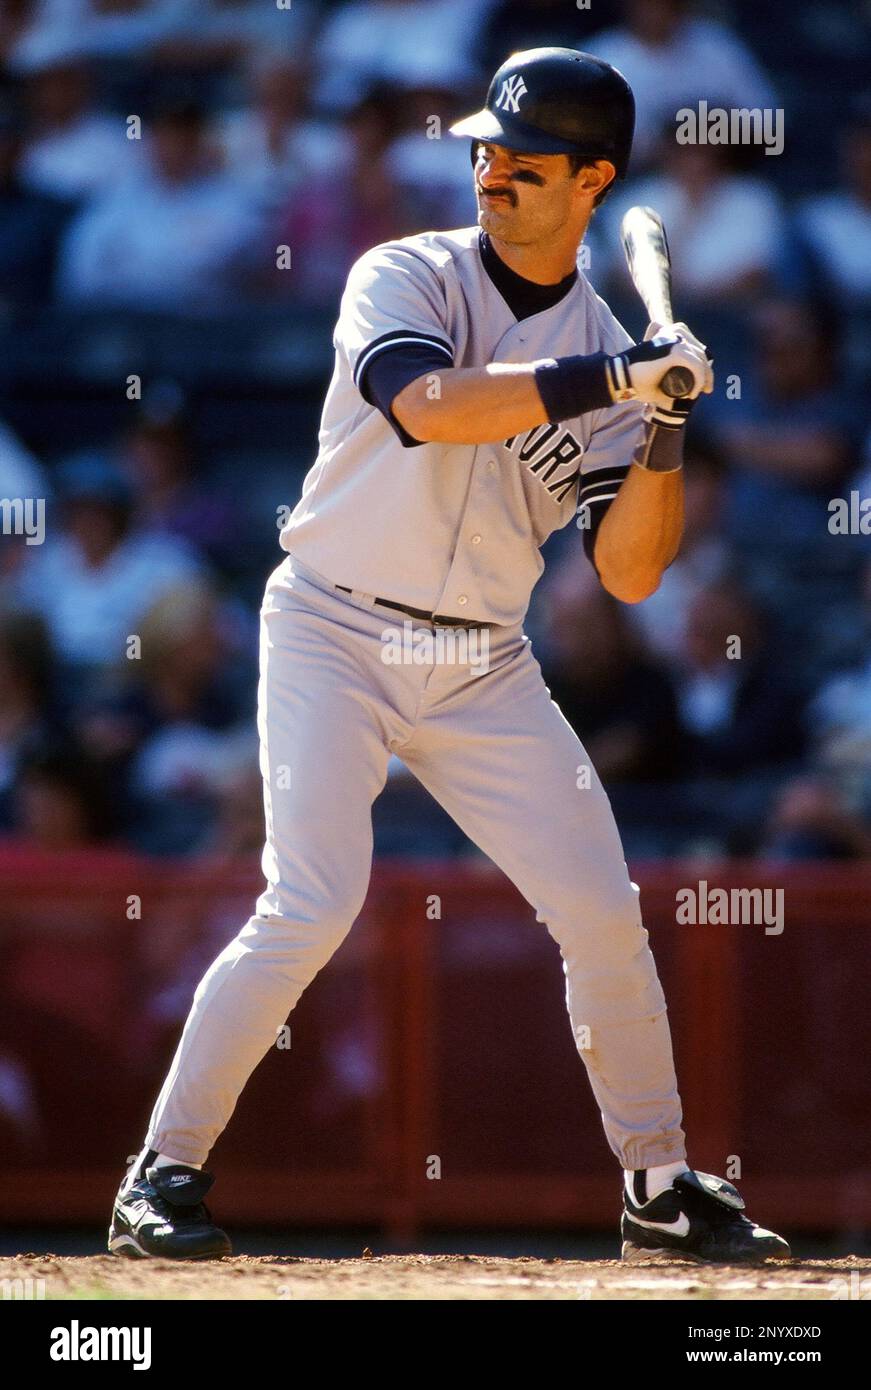 27 Sep. 1995: New York Yankees first baseman Don Mattingly (23) during an  at bat against the Milwaukee Brewers in a game played at Milwaukee County  Stadium in Milwaukee, WI. (Photo By